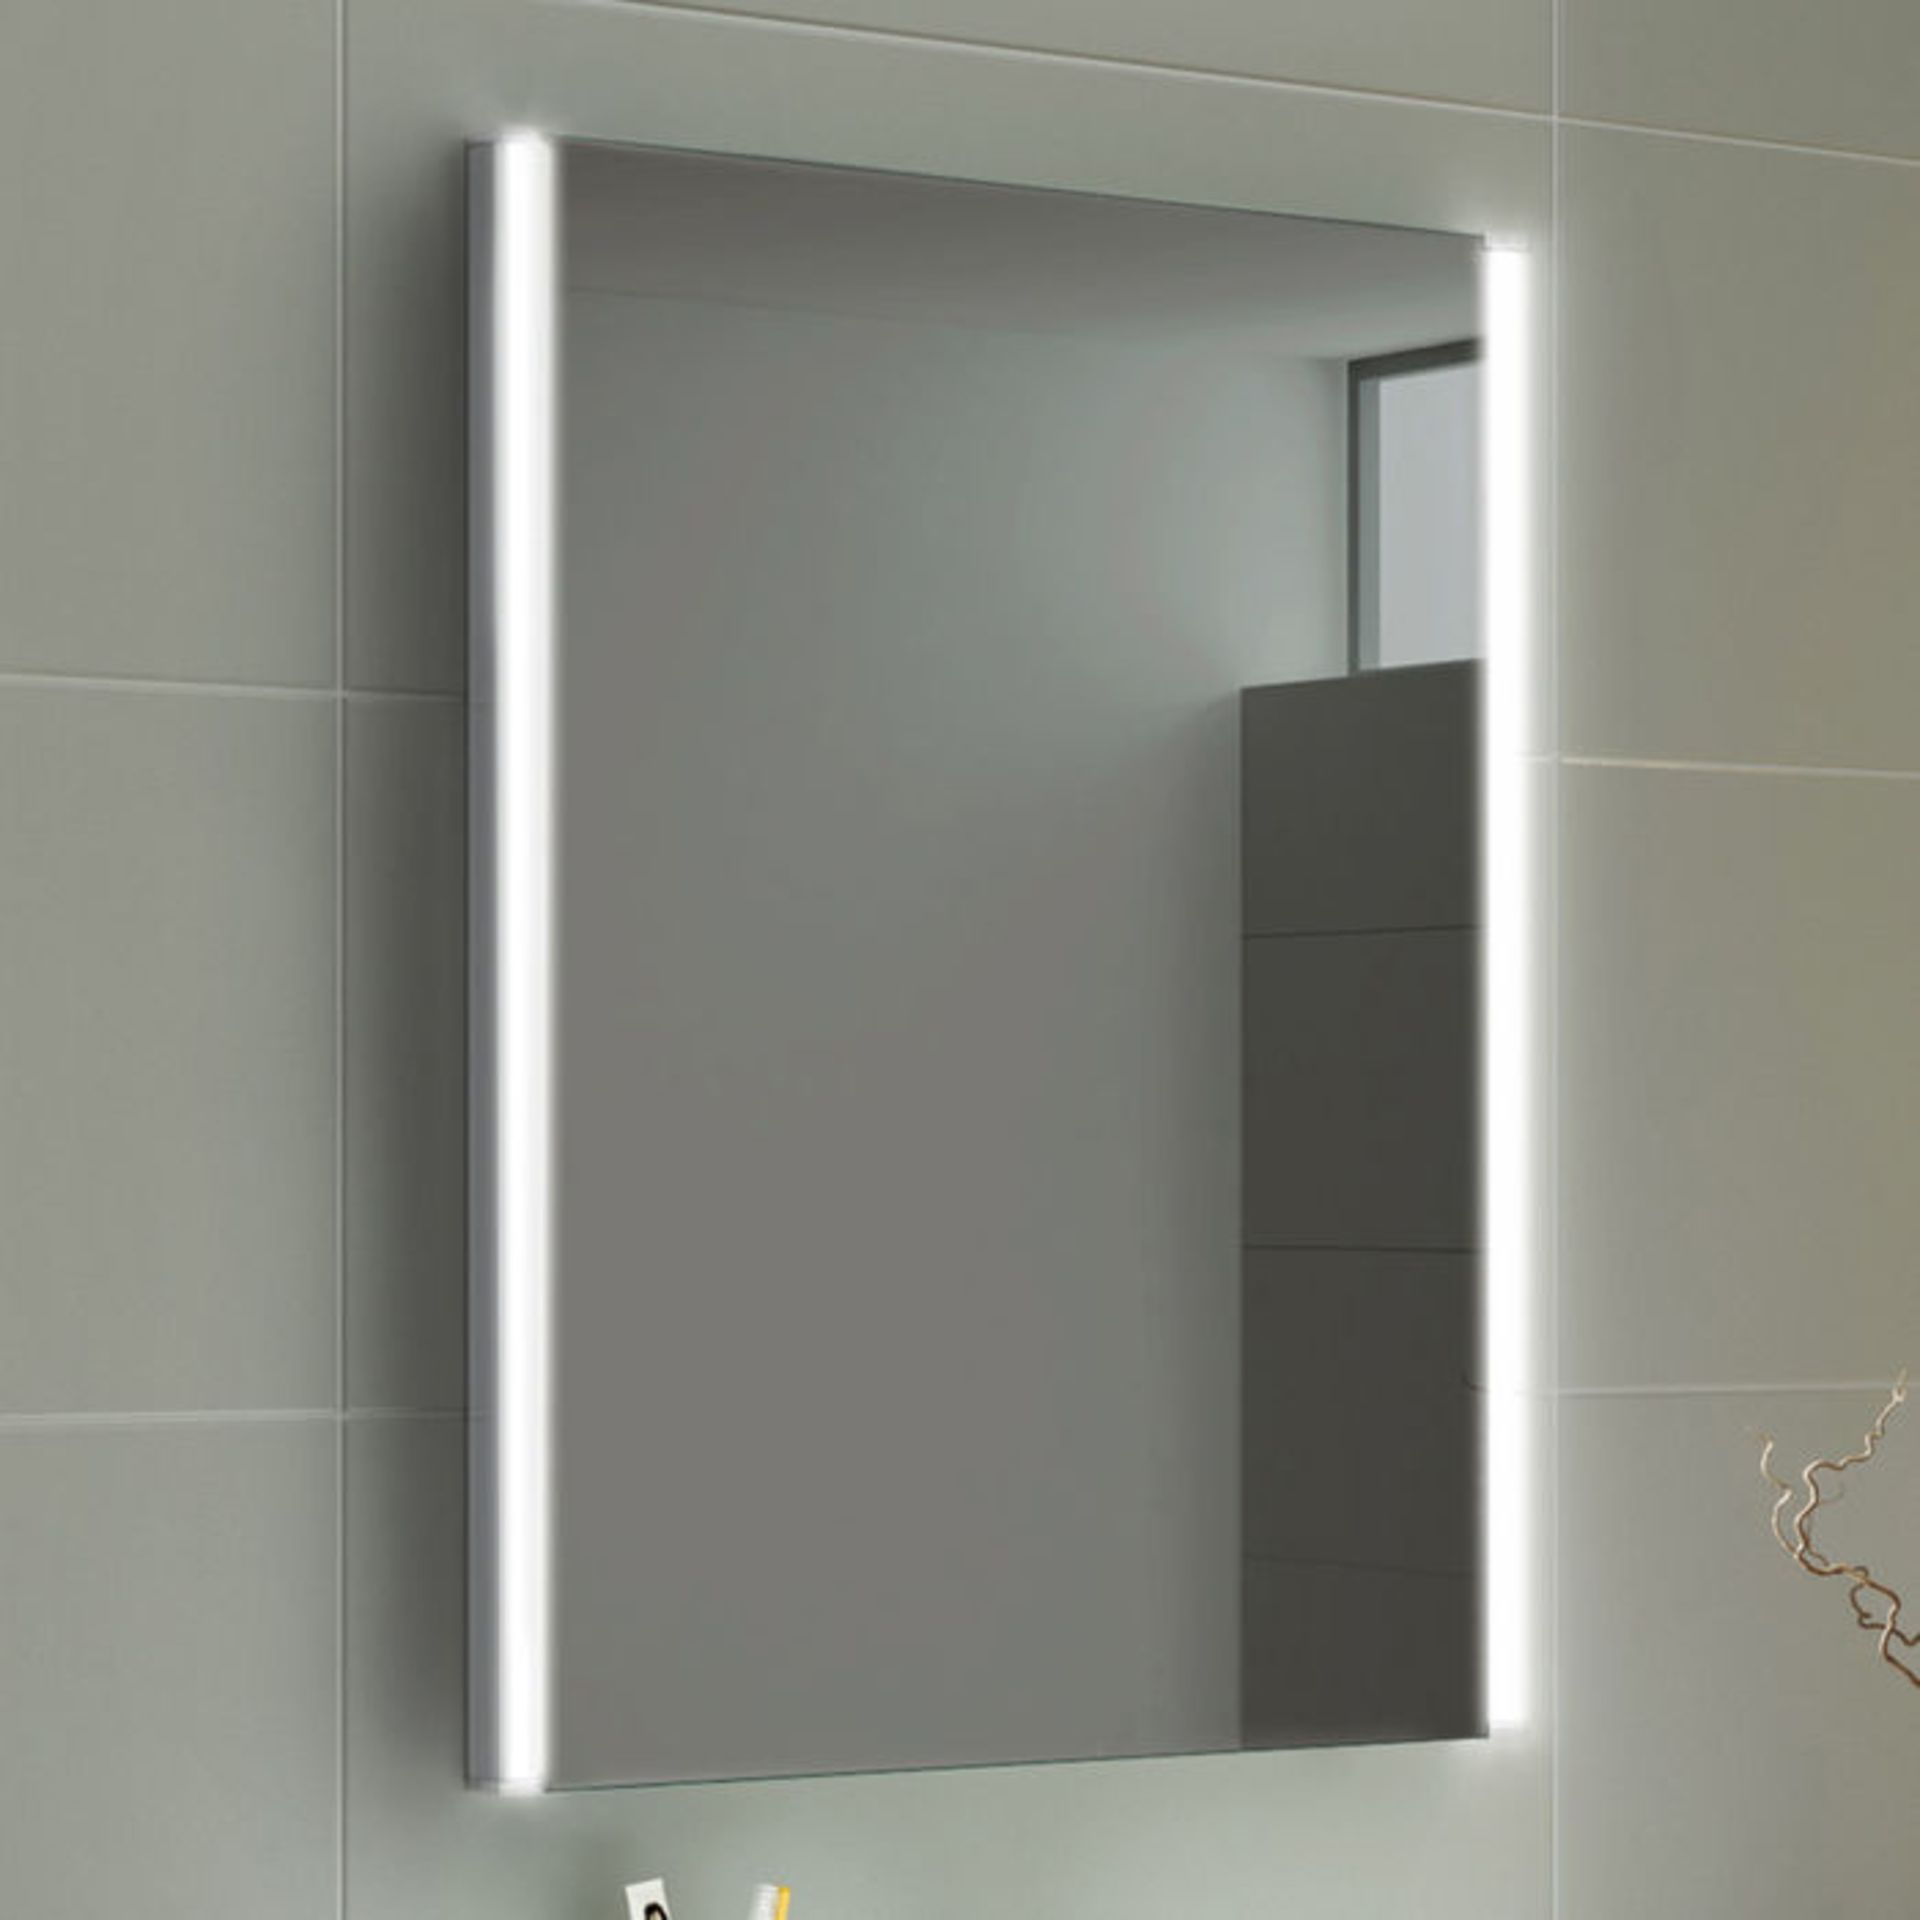 (HS121) 500x700mm Denver Illuminated LED Mirror - Battery Operated. Energy saving controlled On /